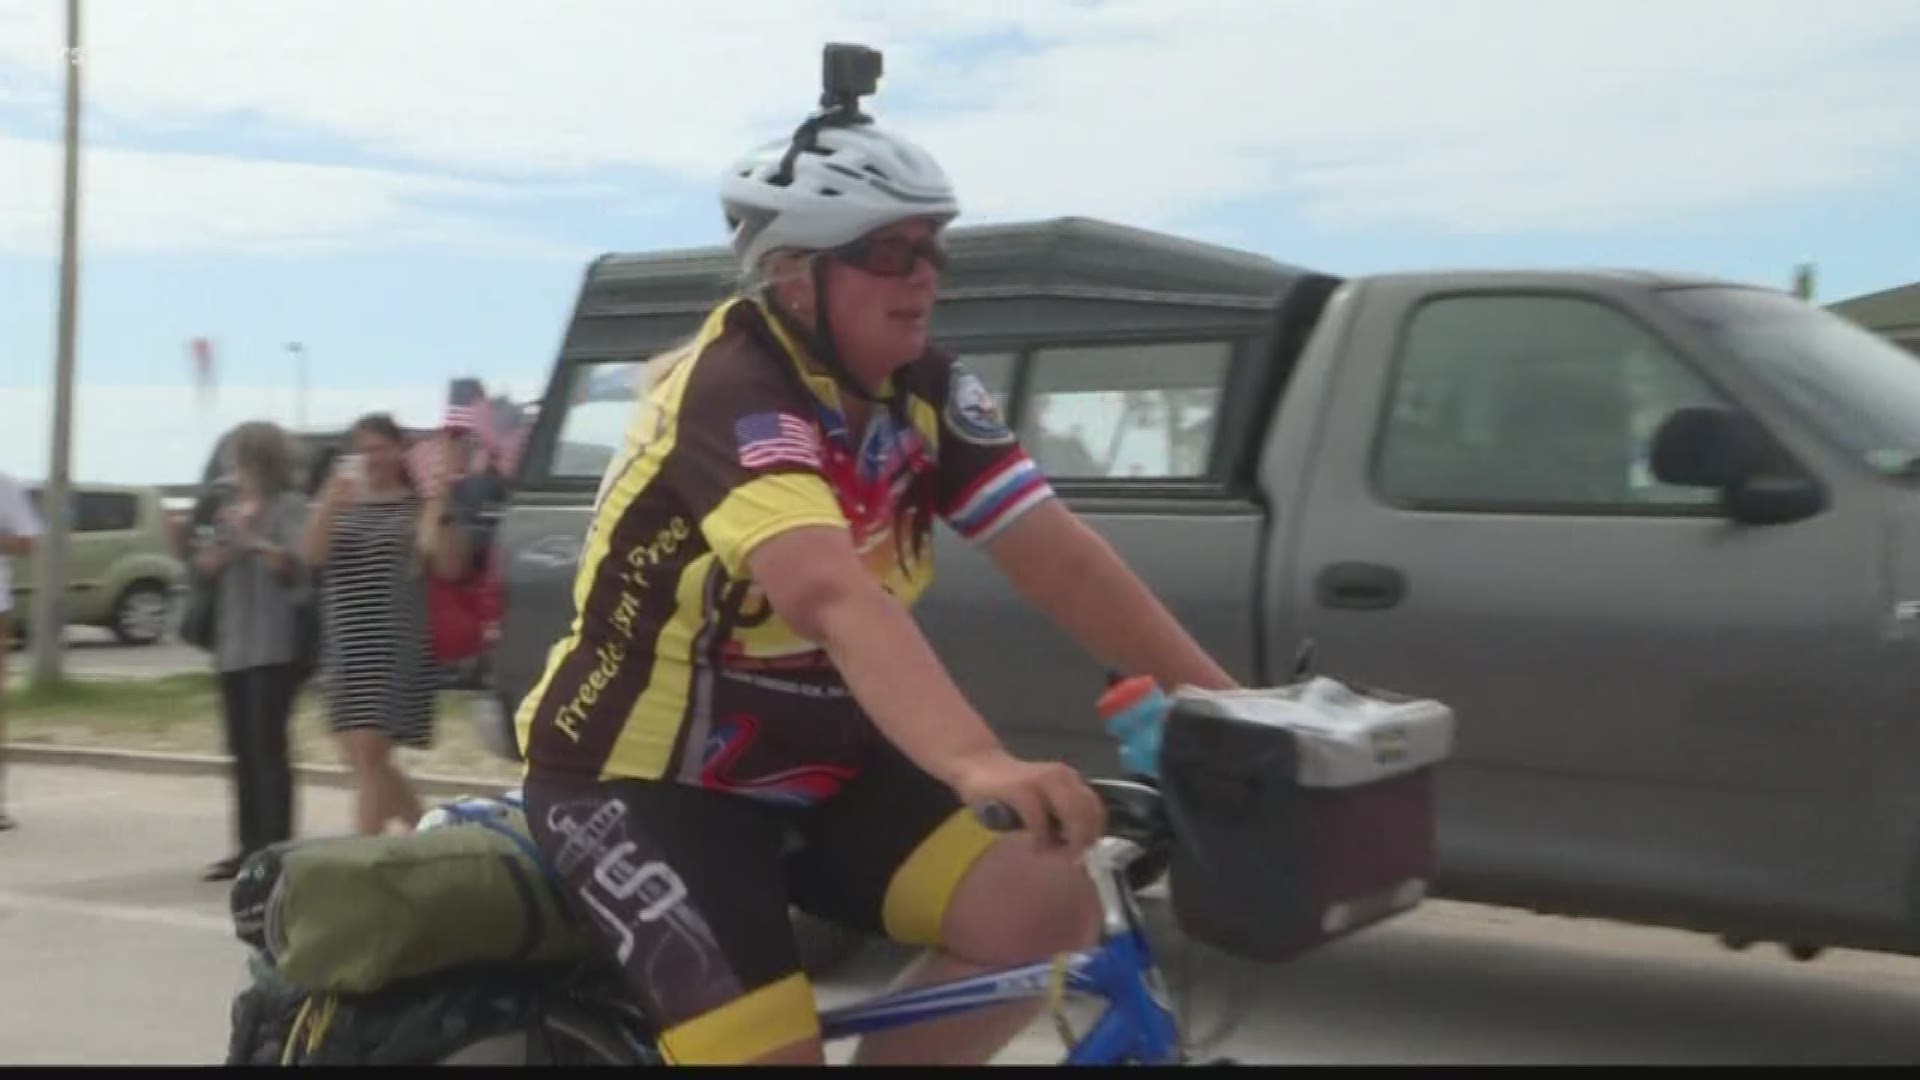 Tracy Sefcik spent 9 weeks riding her bike across the country to raise money for veterans.